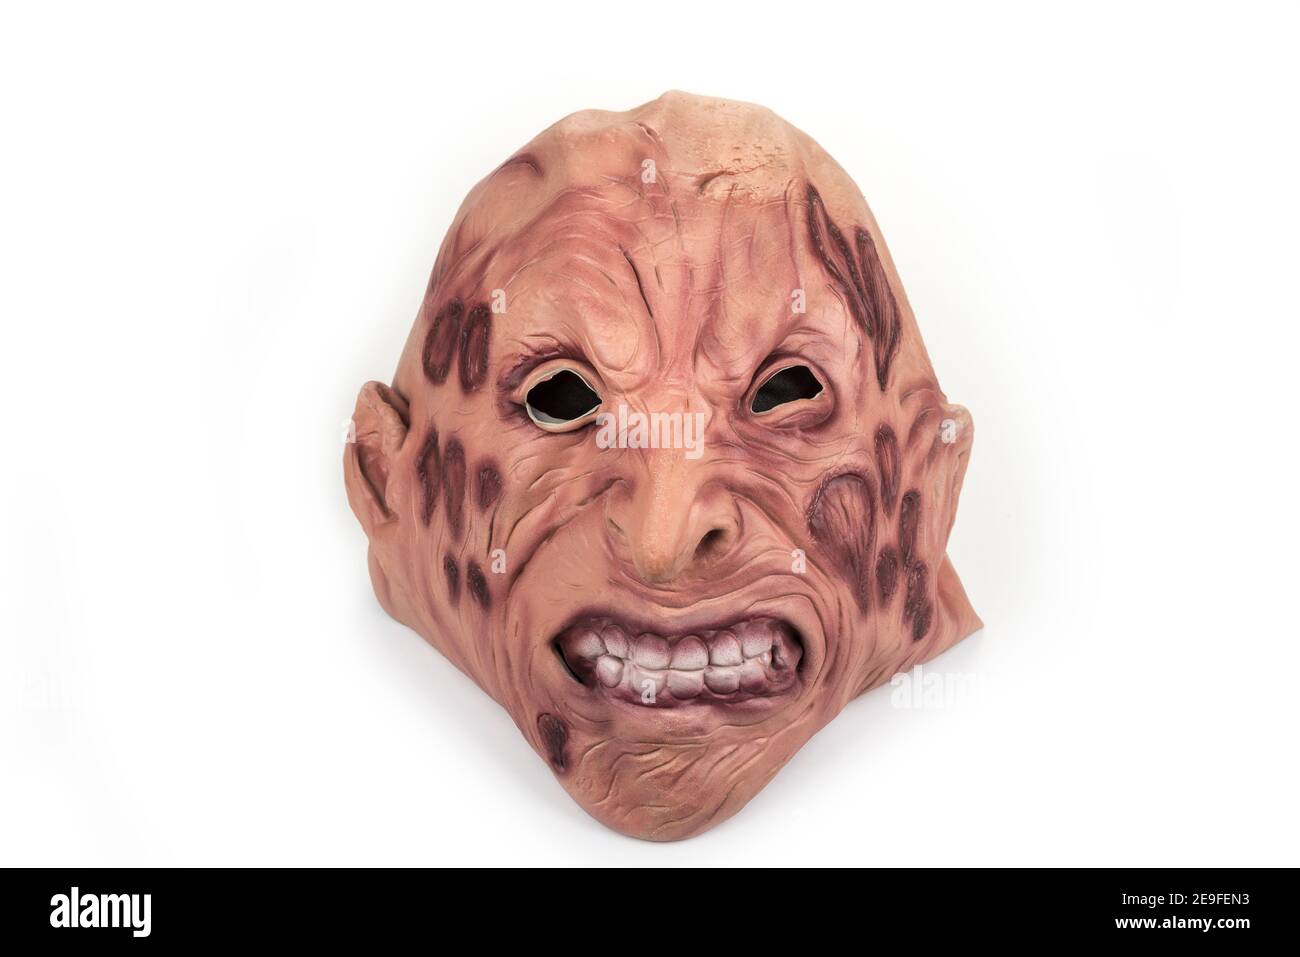 Halloween rubber mask on a white background Stock Photo - Alamy